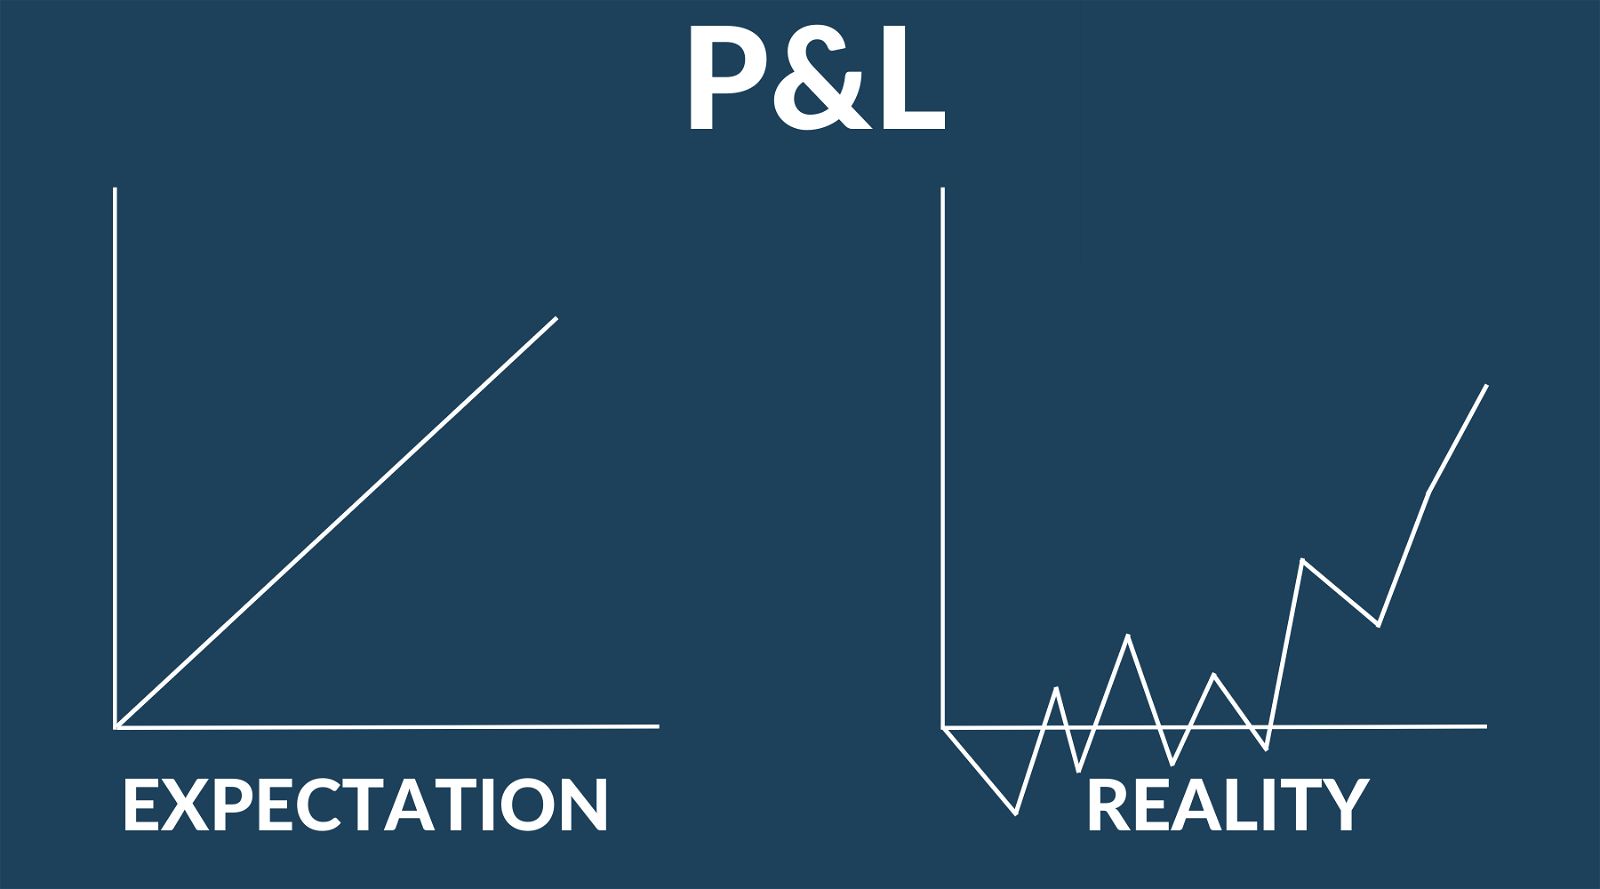 P&L Graphs Showing What New Traders Expect and Reality